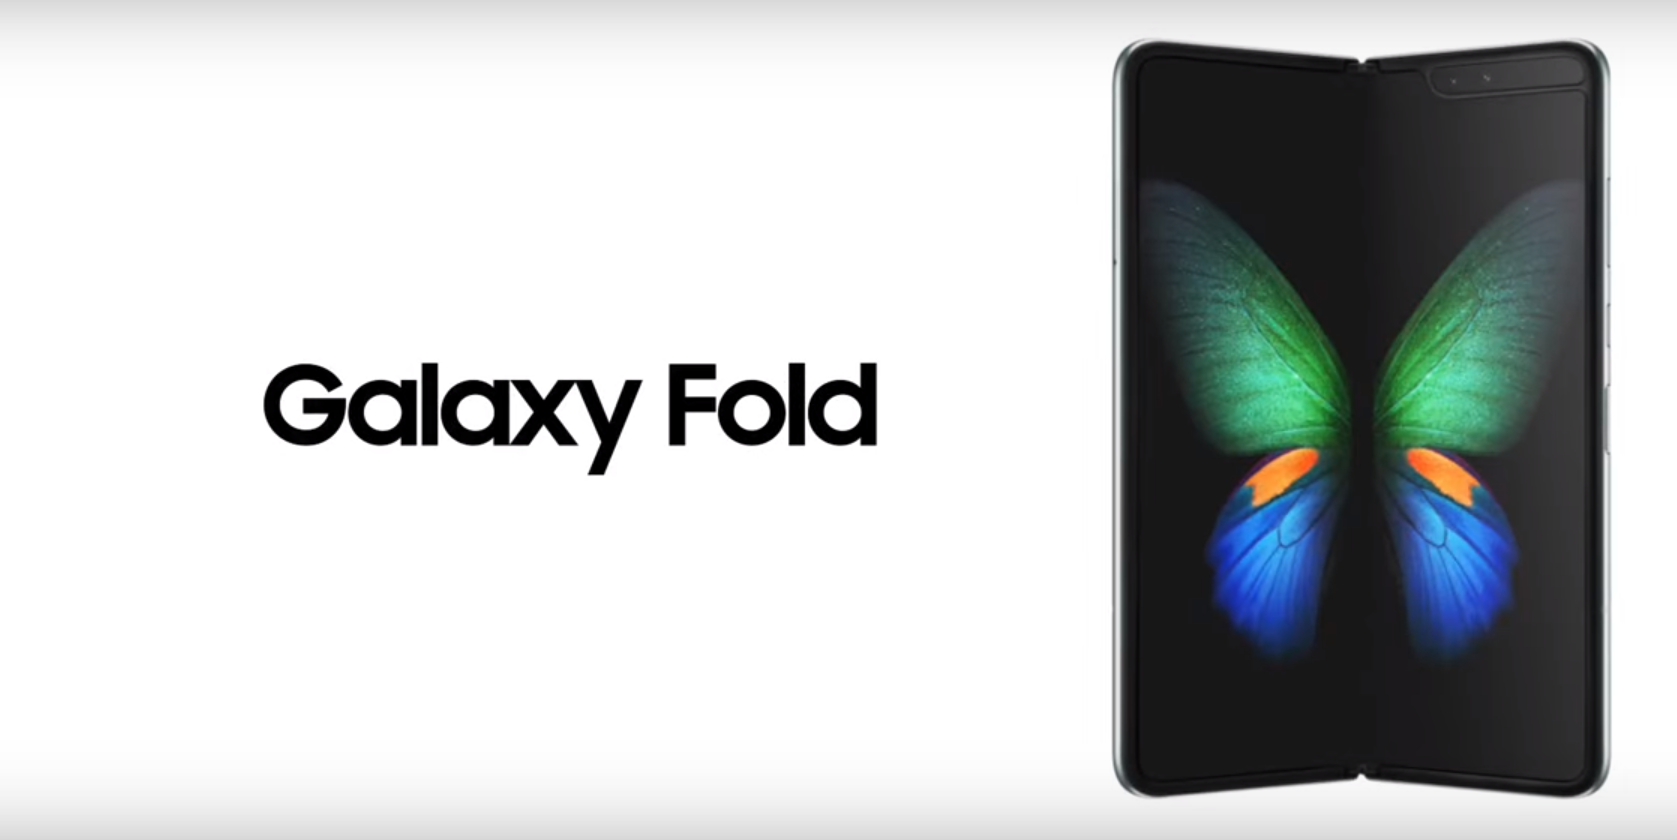 Revamped Galaxy Fold: What Flaws Has Samsung Fixed